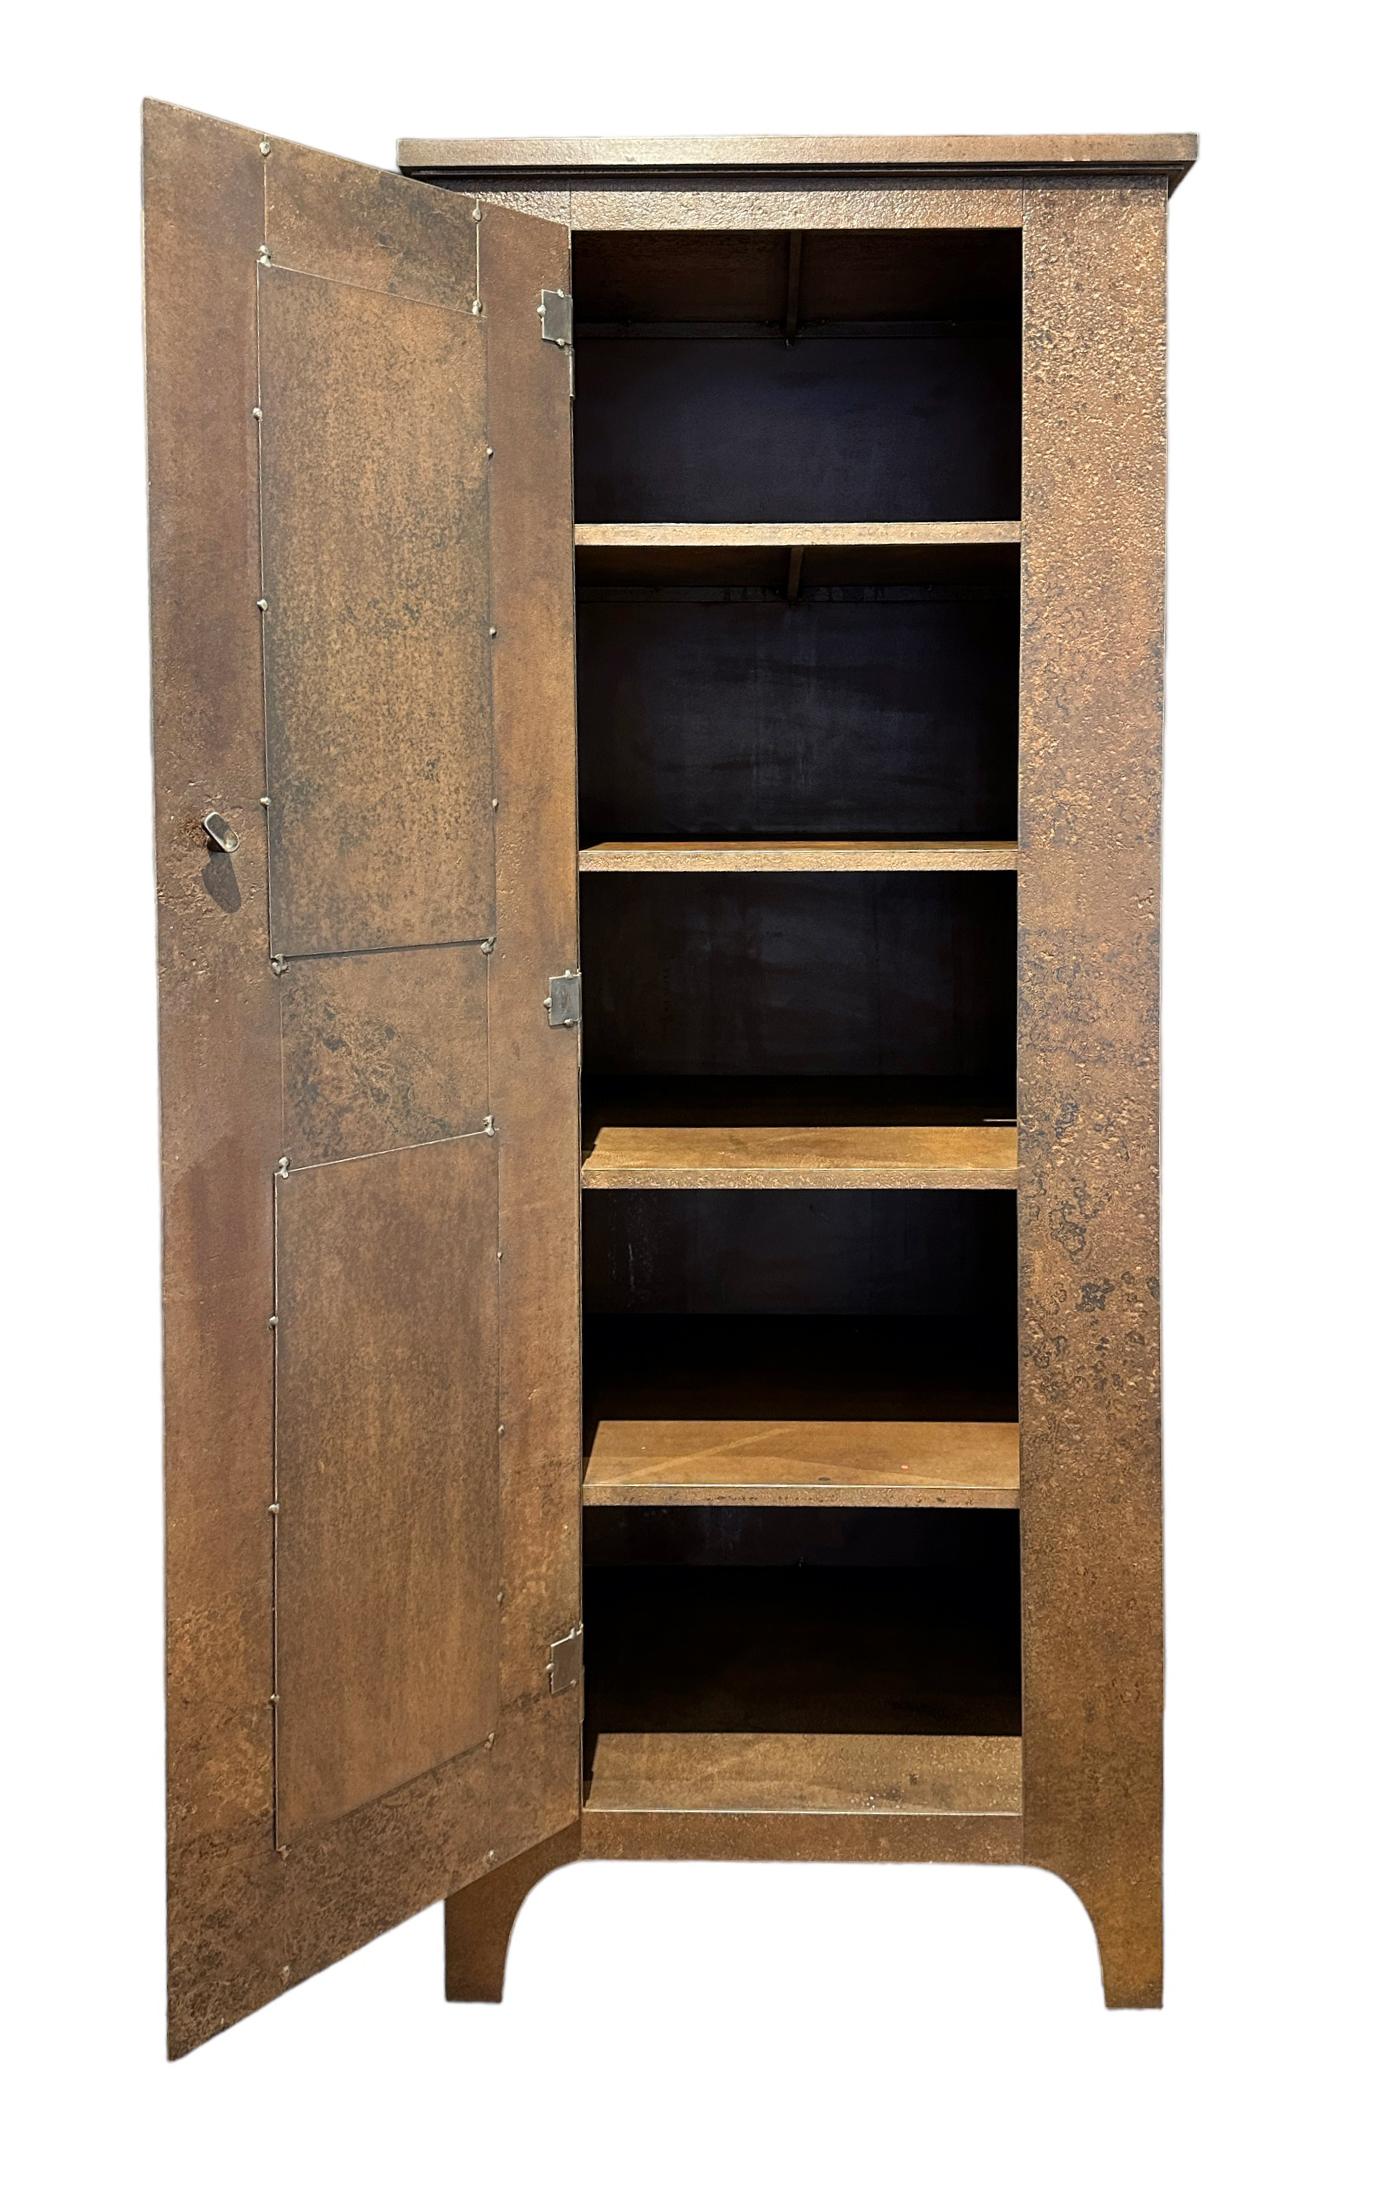 This Shaker inspired one-door armoire is made of fully repurposed steel.  This modern take on an old tradition uses naturally rusted steel to bring a warmth to this beautifully constructed armoire.   Four fixed shelves inside makes this a highly